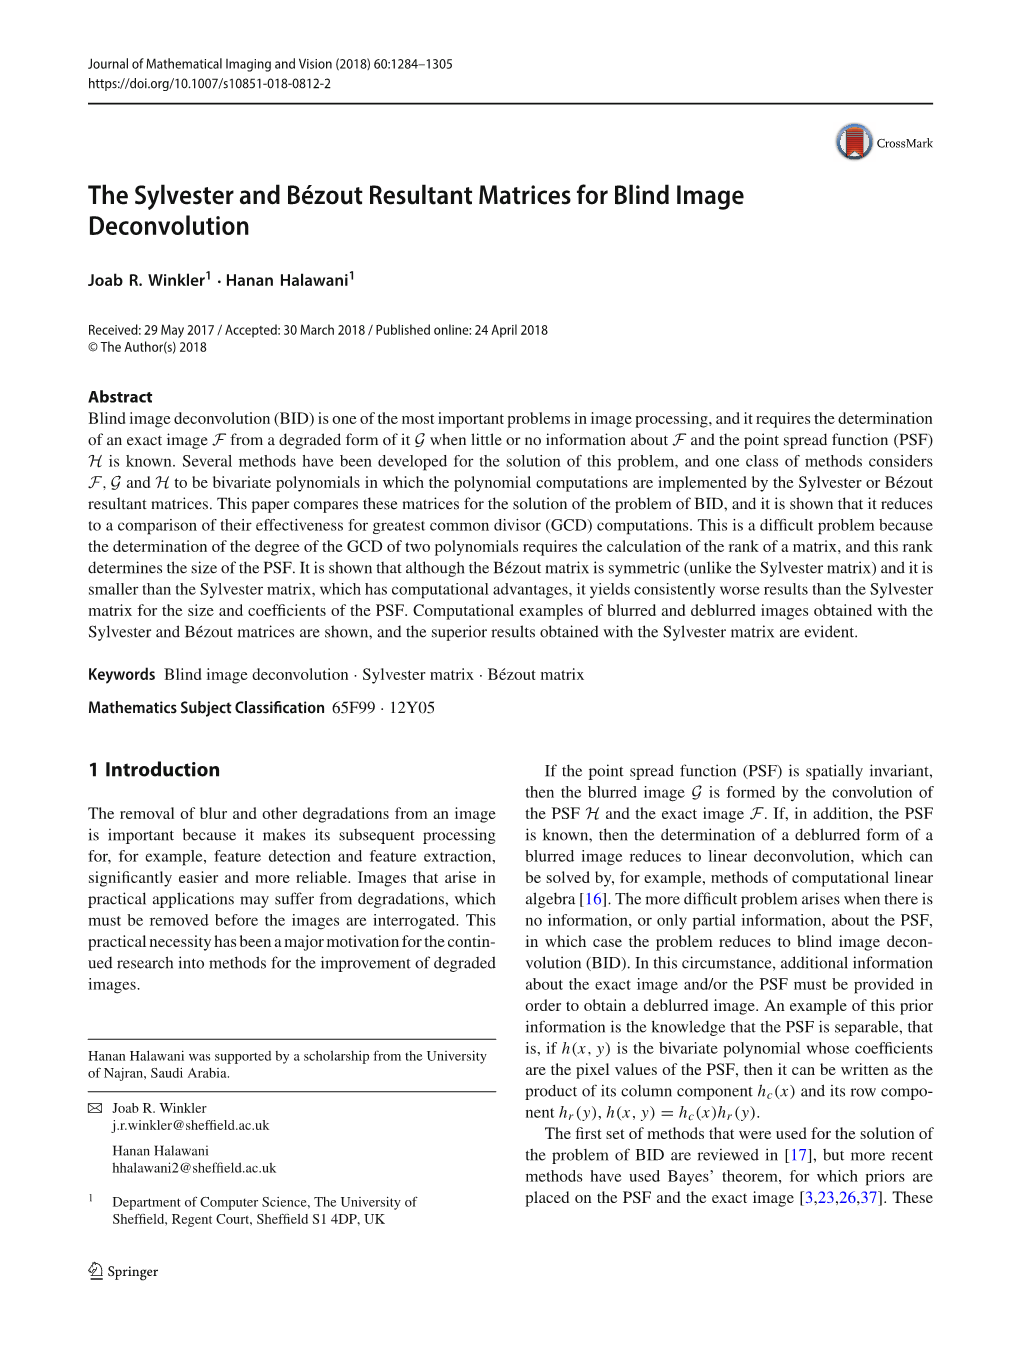 The Sylvester and Bézout Resultant Matrices for Blind Image Deconvolution